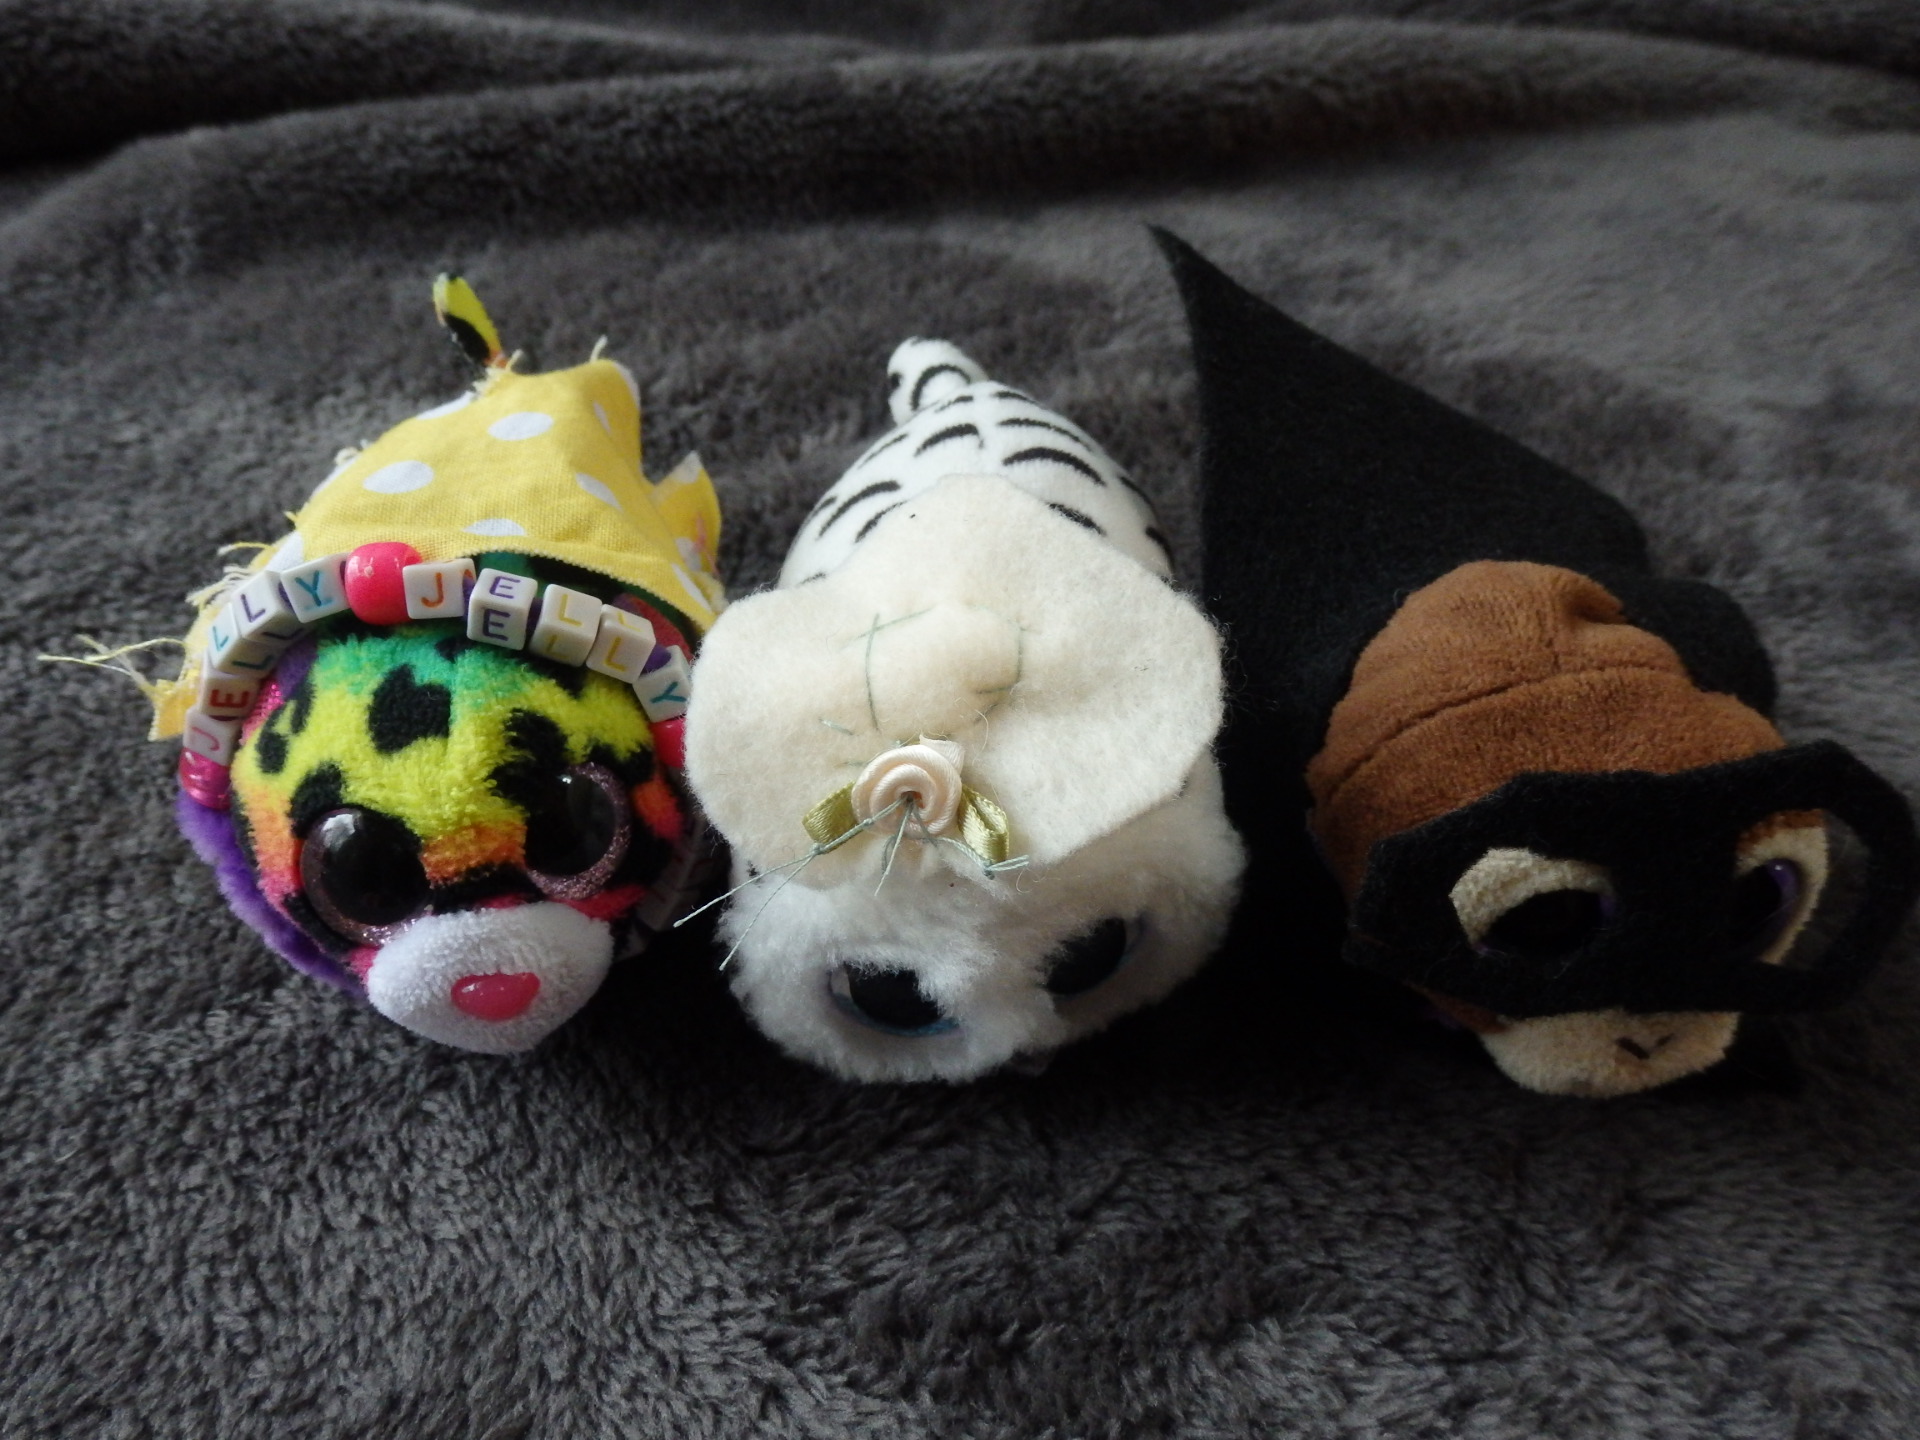 stuffed animals wearing hand-sewn clothes made by a child